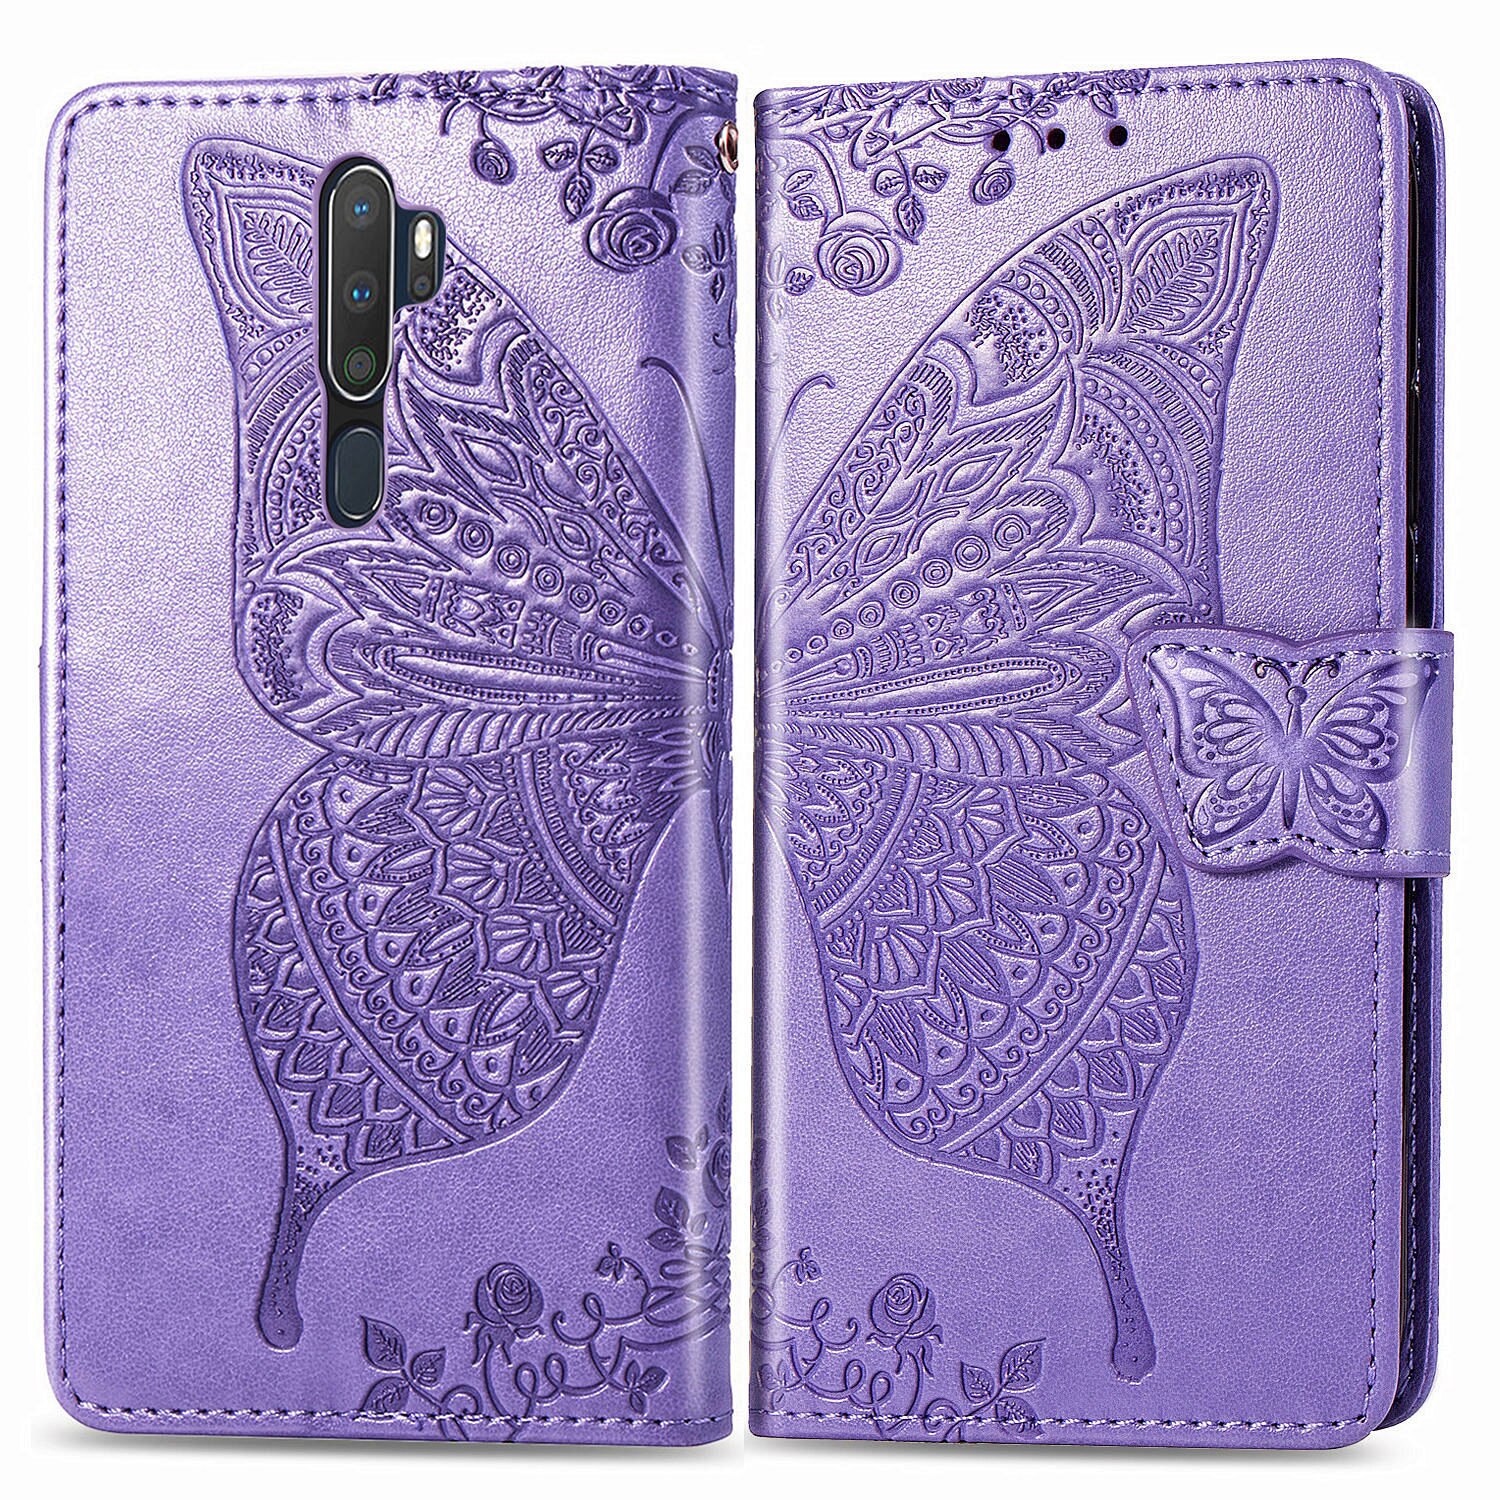 Voor Coque OPPO A9 Case OPPO A5 Case Luxe Flip PU Leather Card Slots Wallet Stand Case voor capa OPPO A9 A5 Cover